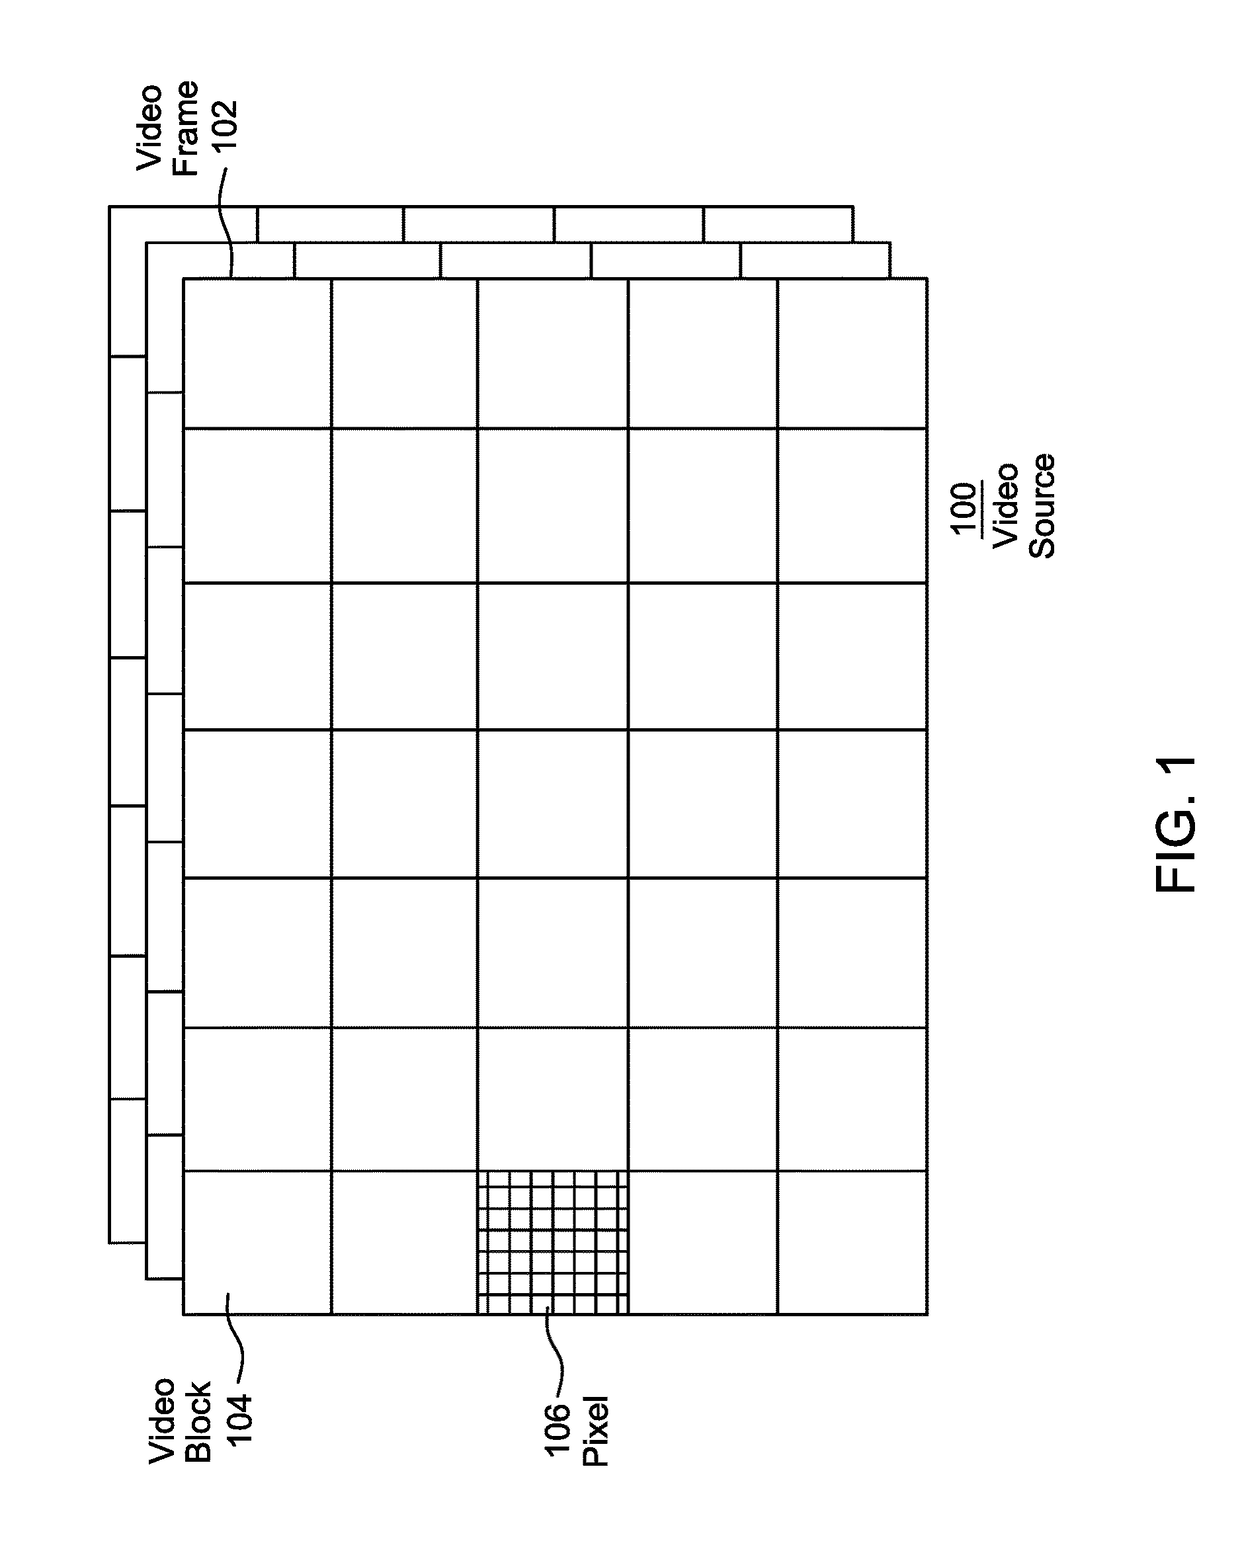 Systems and methods for motion estimation for coding a video sequence